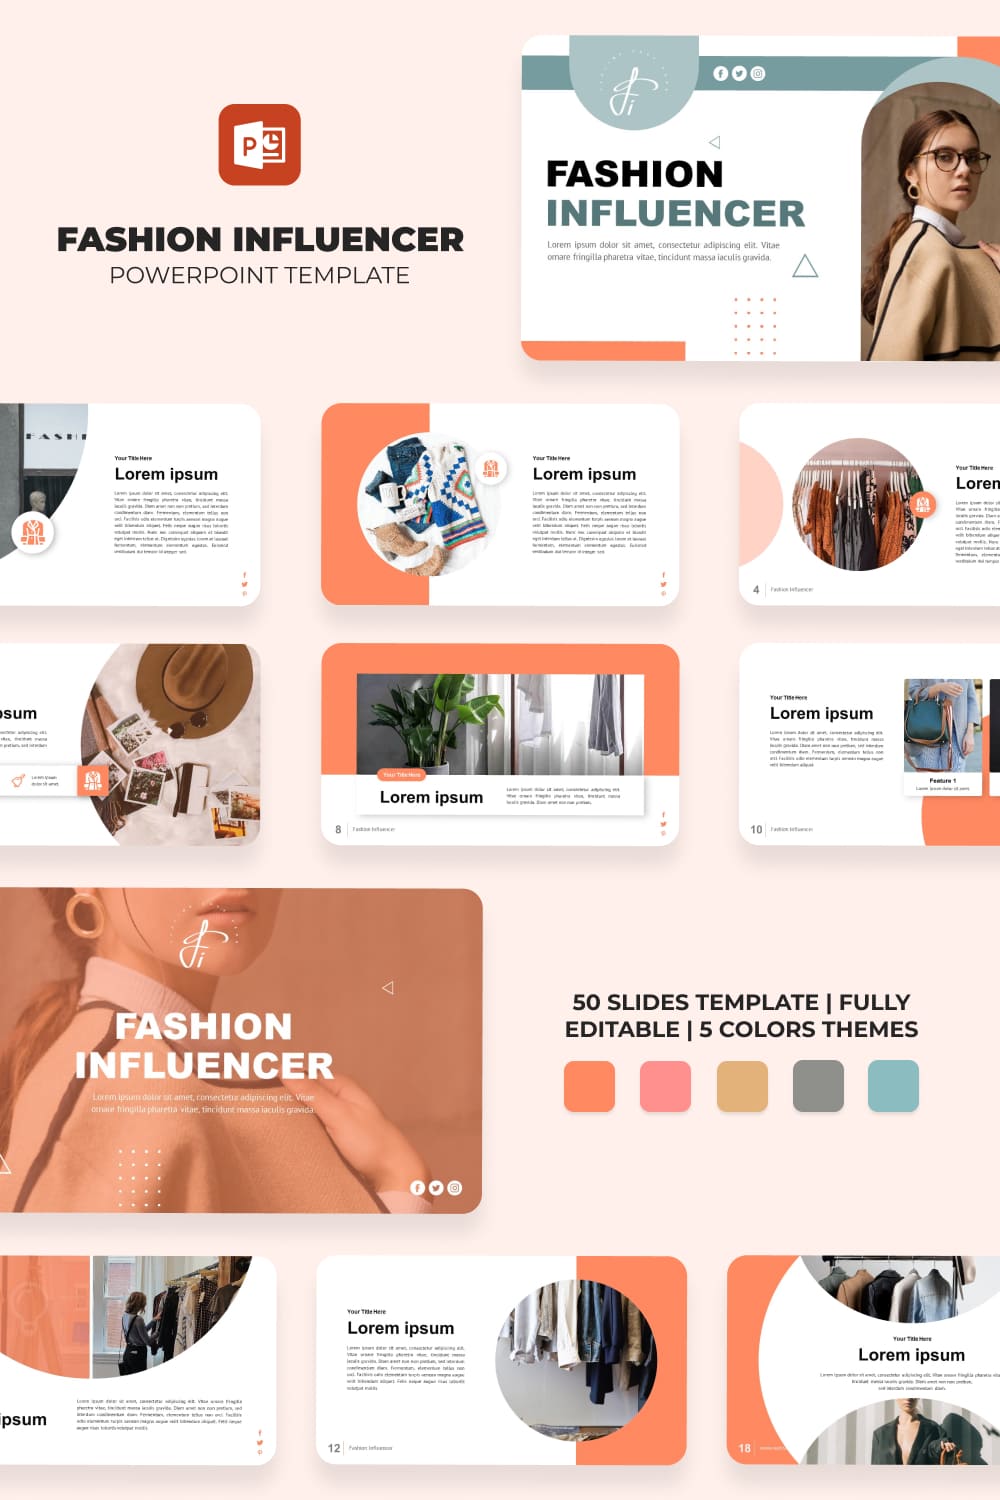 Fashion Influencer Powerpoint Template.